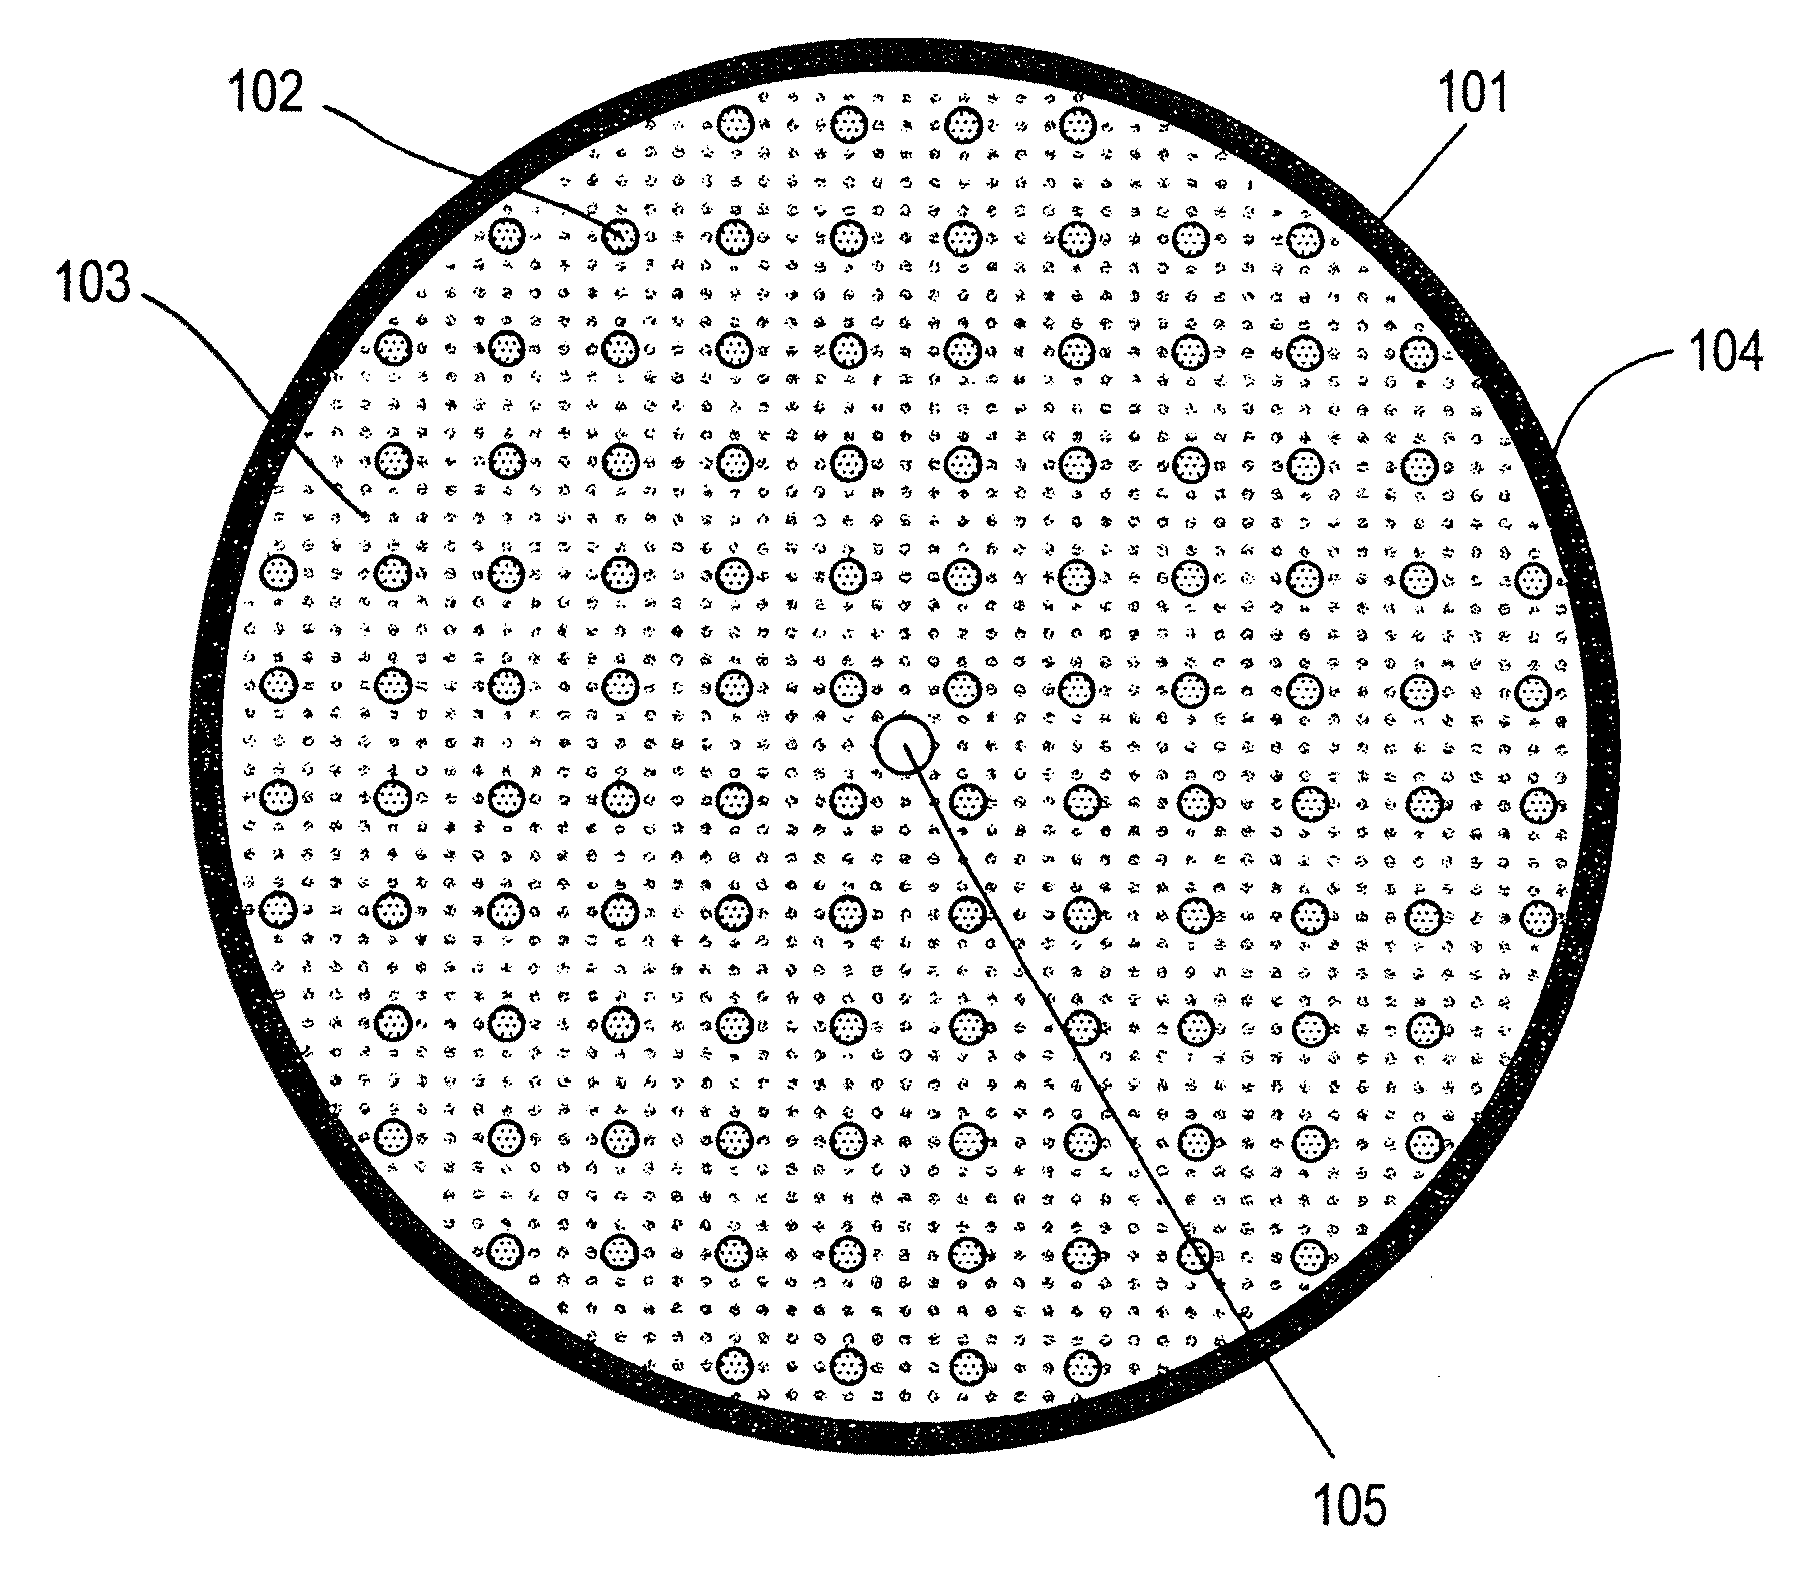 Substrate holding system and exposure apparatus using the same